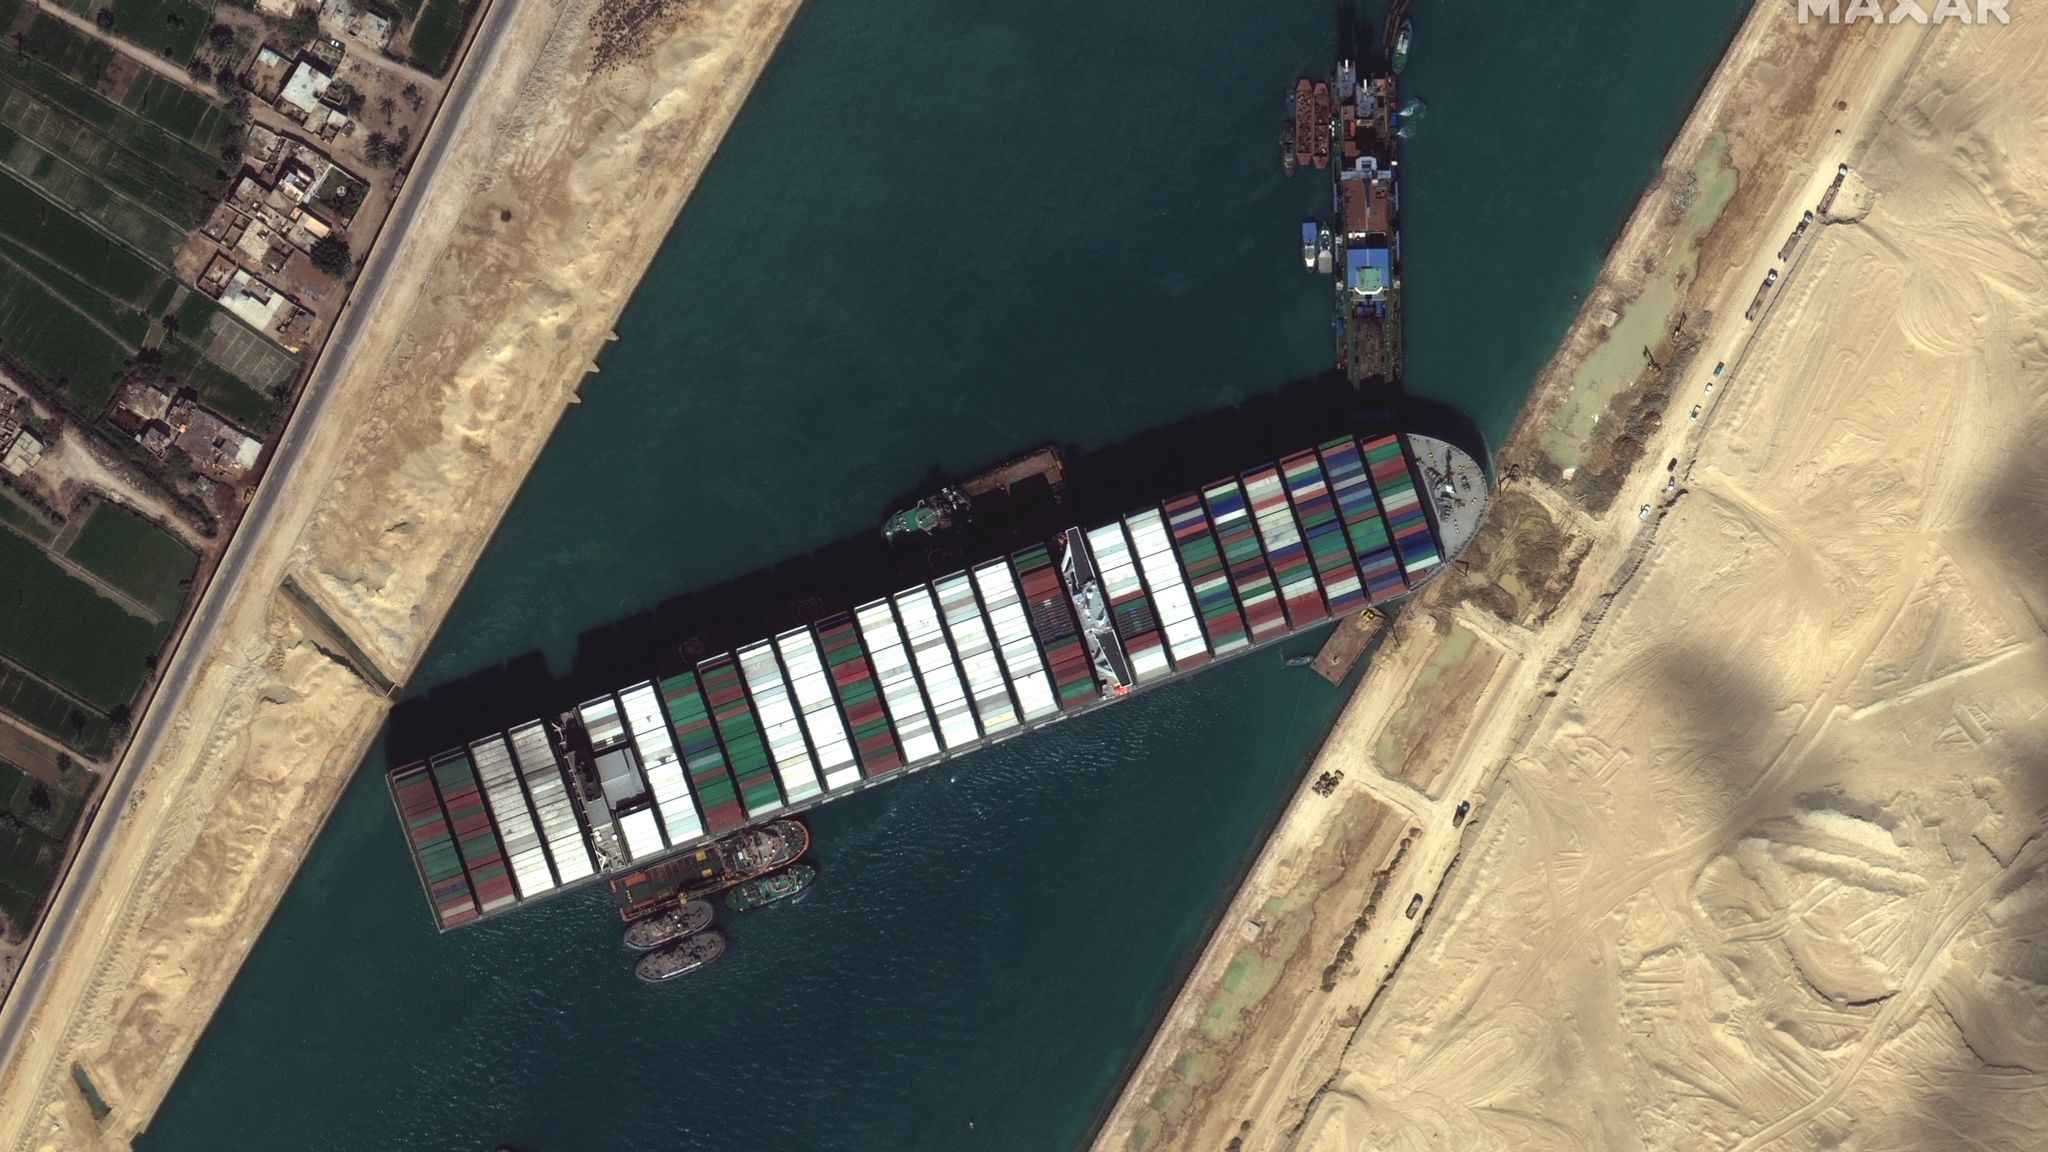 Suez Canal Ship Had Another Accident in 2019, Colliding With a Ferry - WSJ